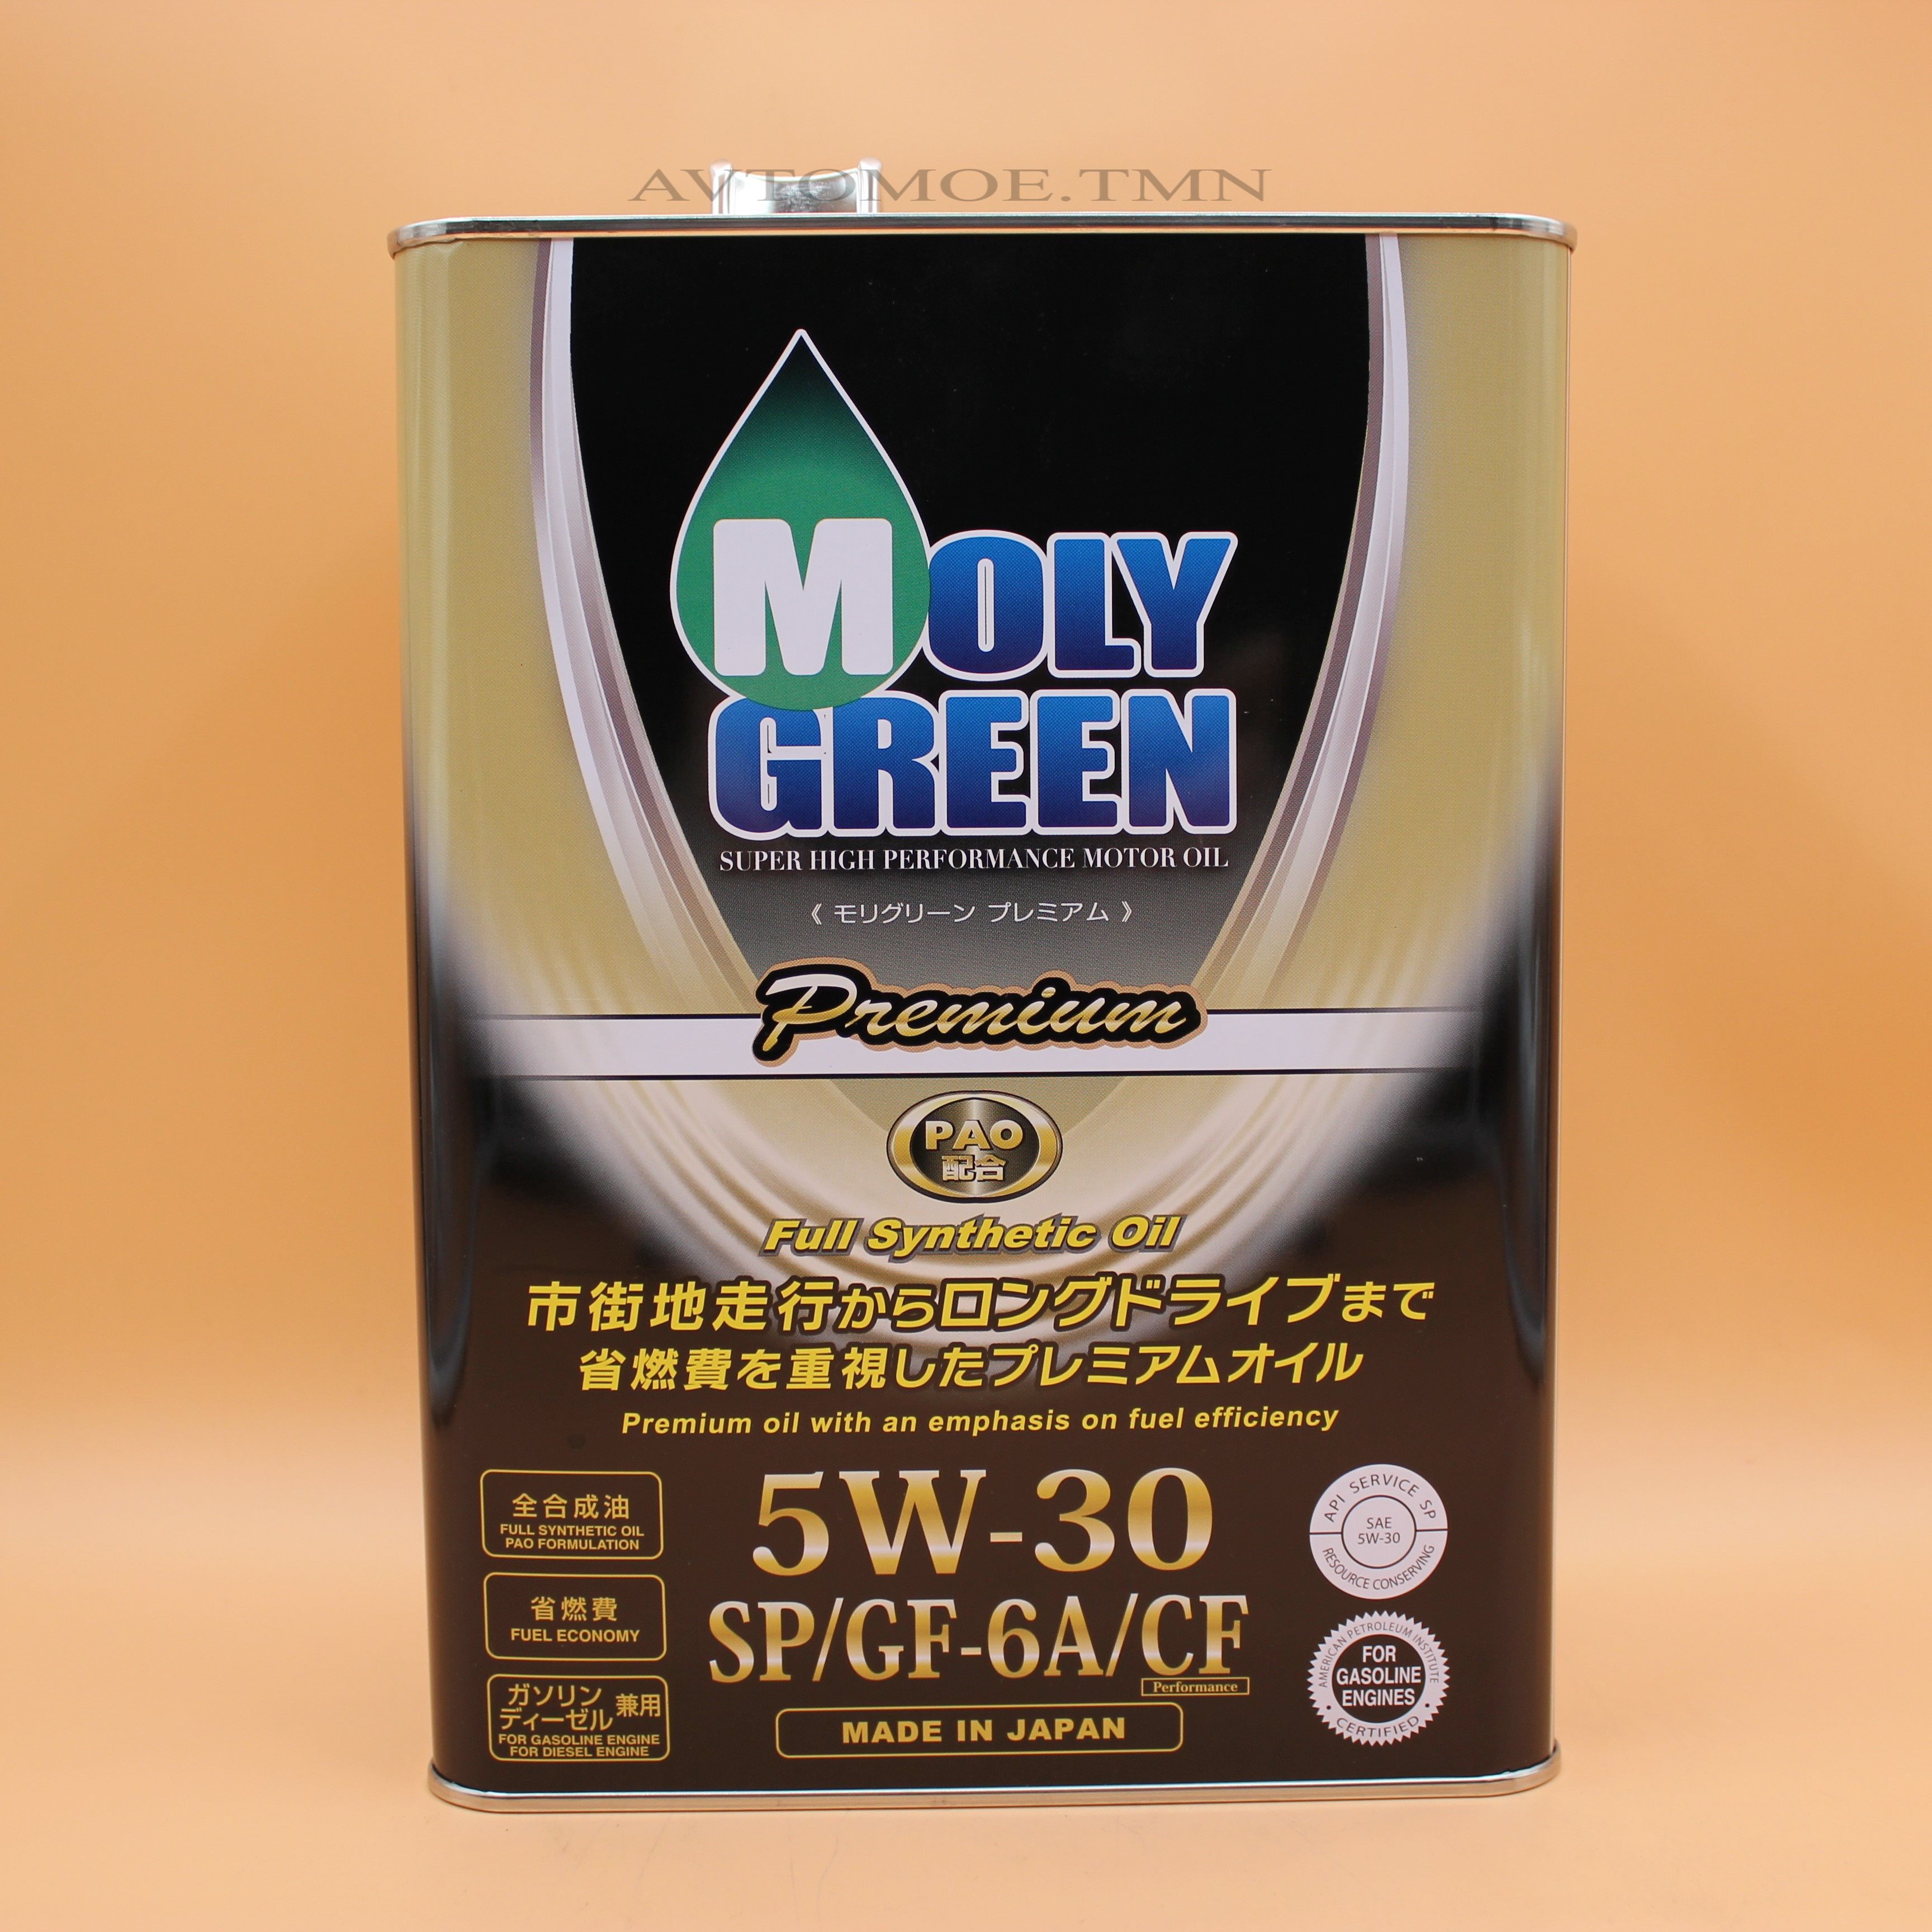 Отзыв масло moly green. Moly Green 5w30 Premium. Moly Green Premium 0w30. MOLYGREEN Pro s 5w-30. MOLYGREEN Euro protect 5w-30 c3 SP/gf6a (1.0 л).